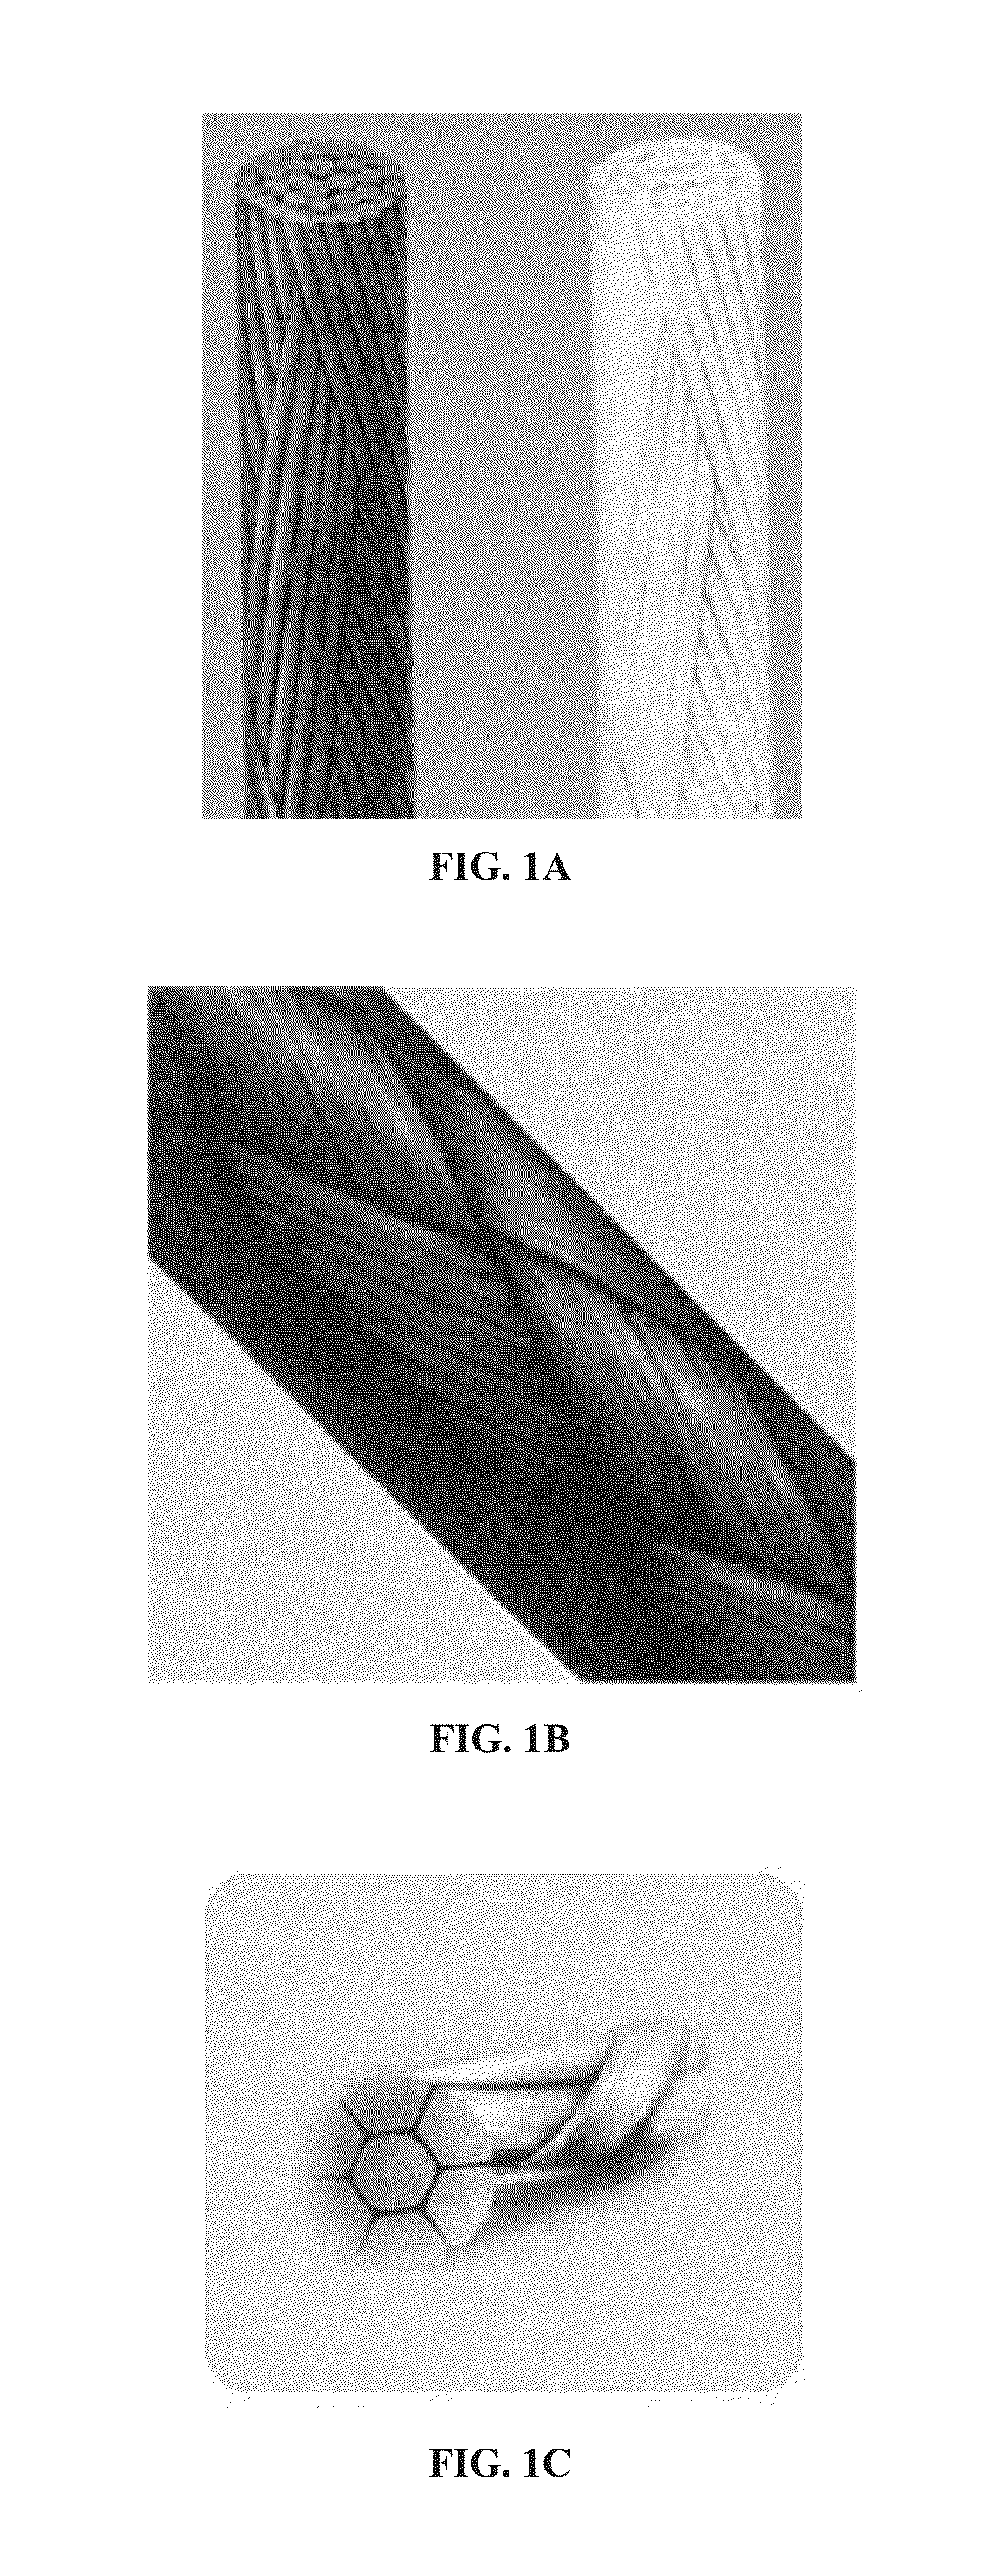 Mechanically Strong absorbable Polymeric Blend Compositions of Precisely Controllable Absorption Rates, Processing Methods, and Products Therefrom